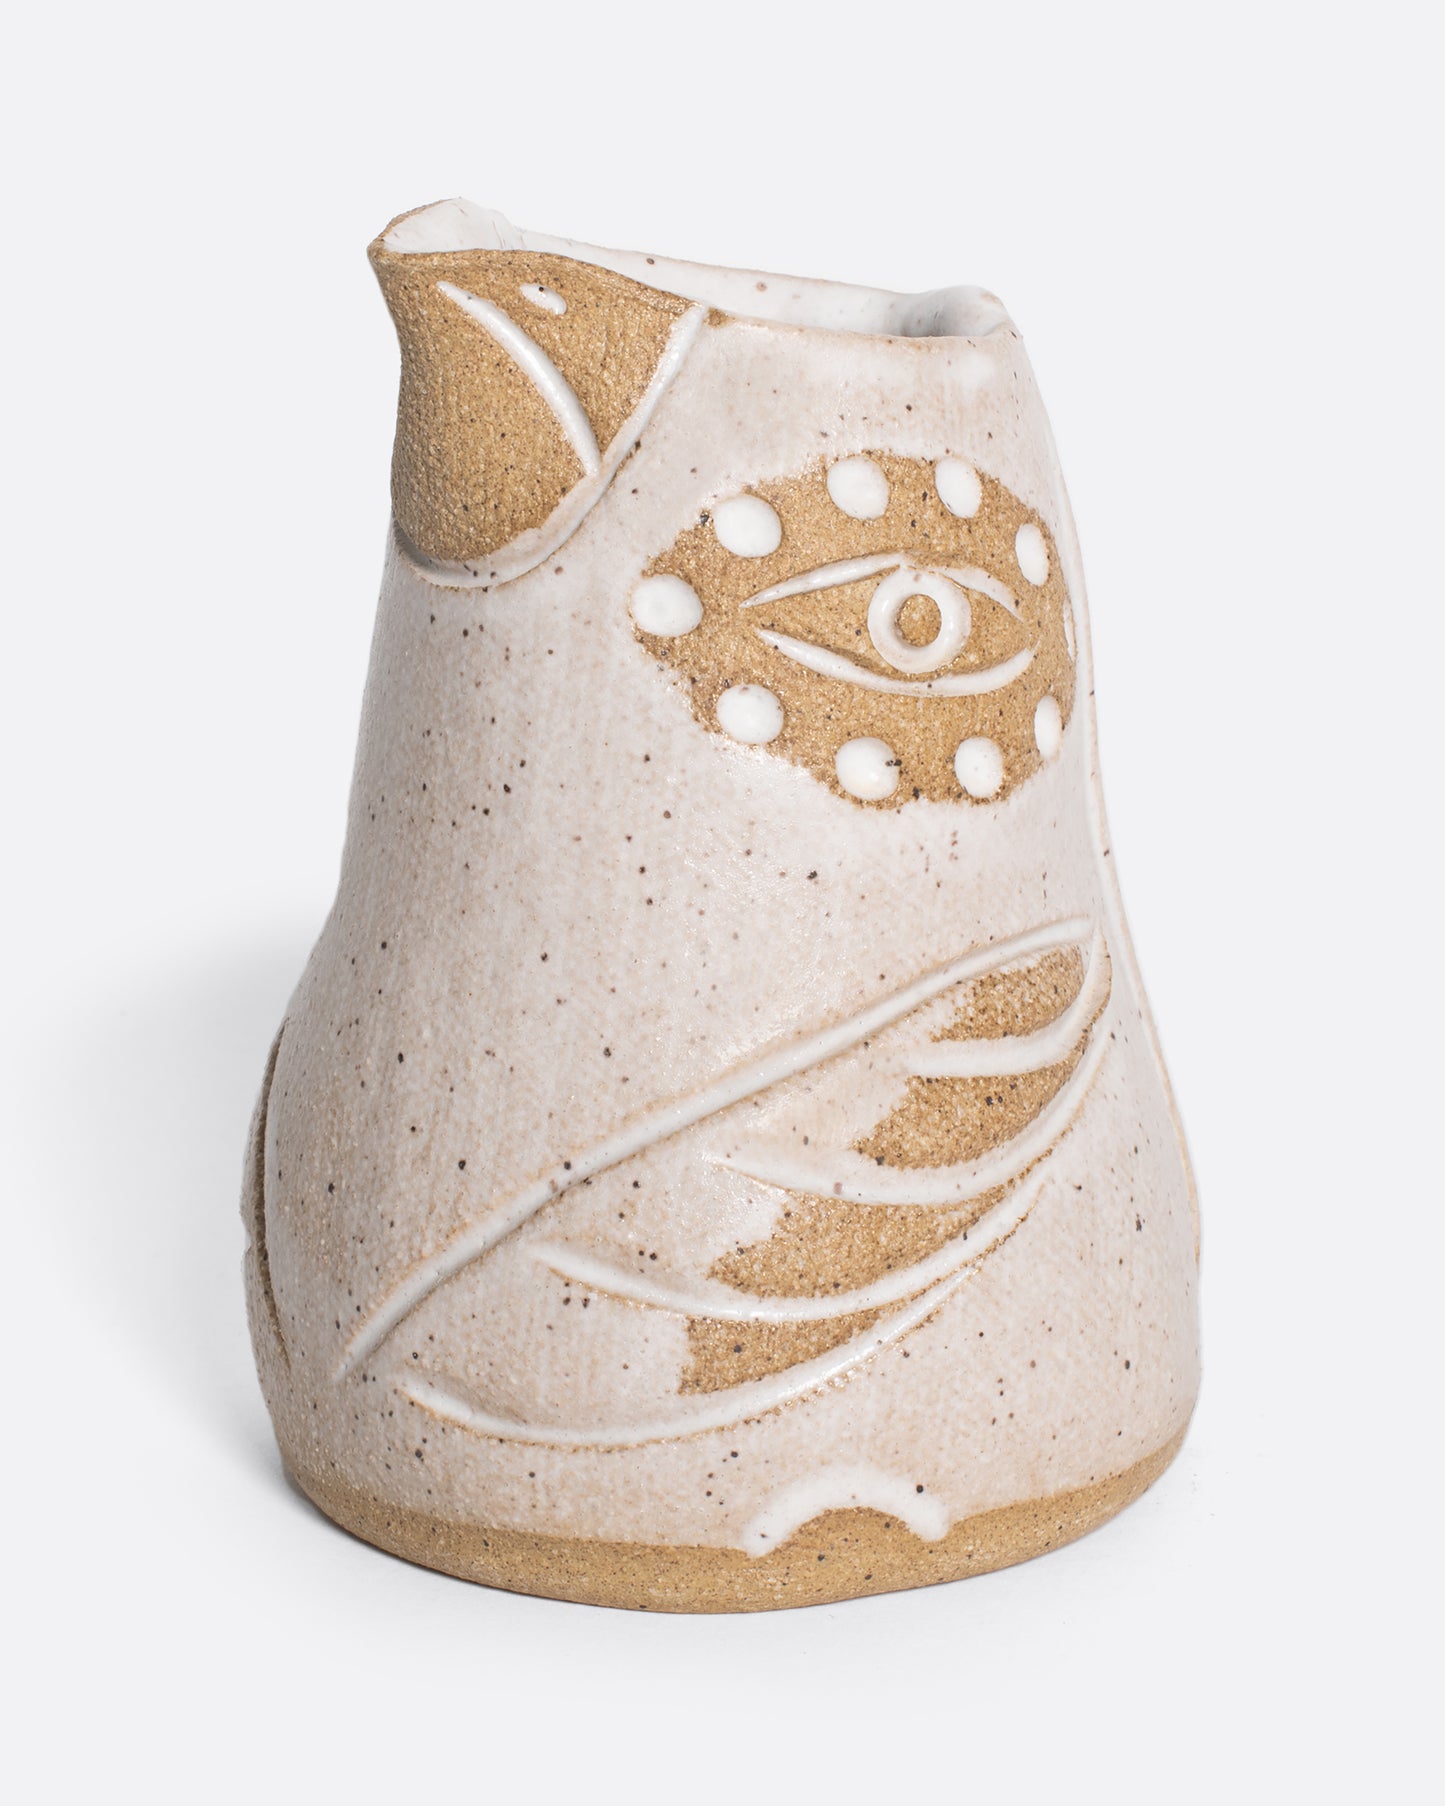 Close up of a creamer shaped like a bird in white and brown.